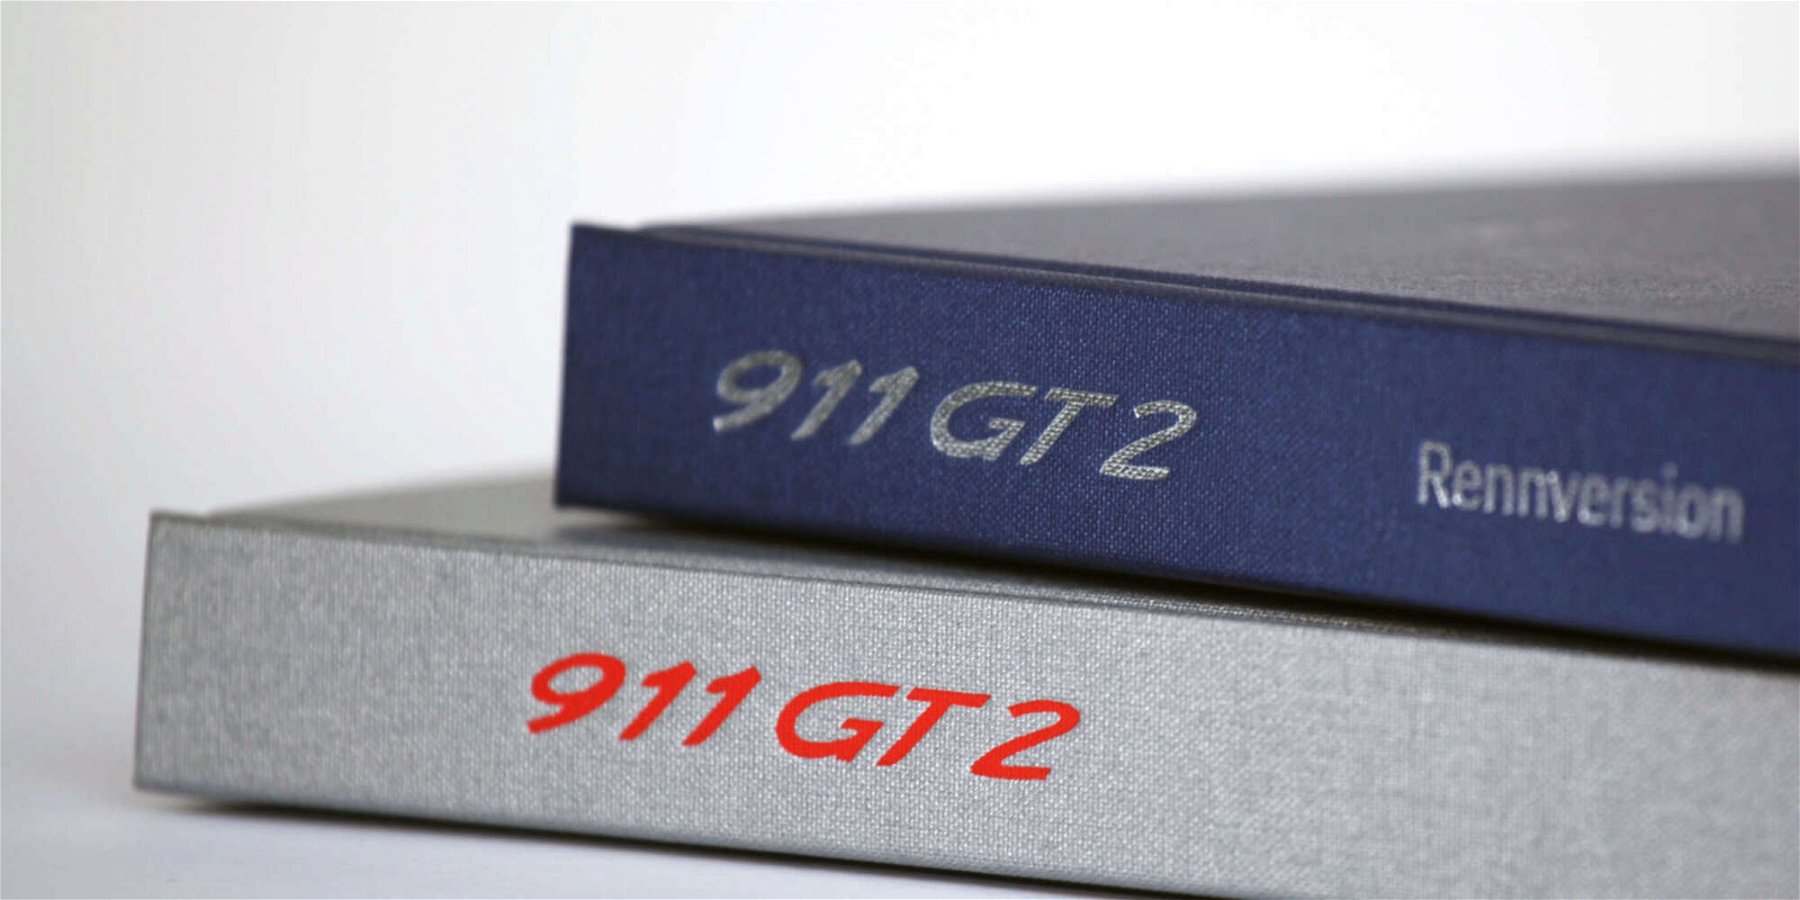 Elferspot competition – The 993 GT2 Book – Limited First Edition- until January 31, 2022